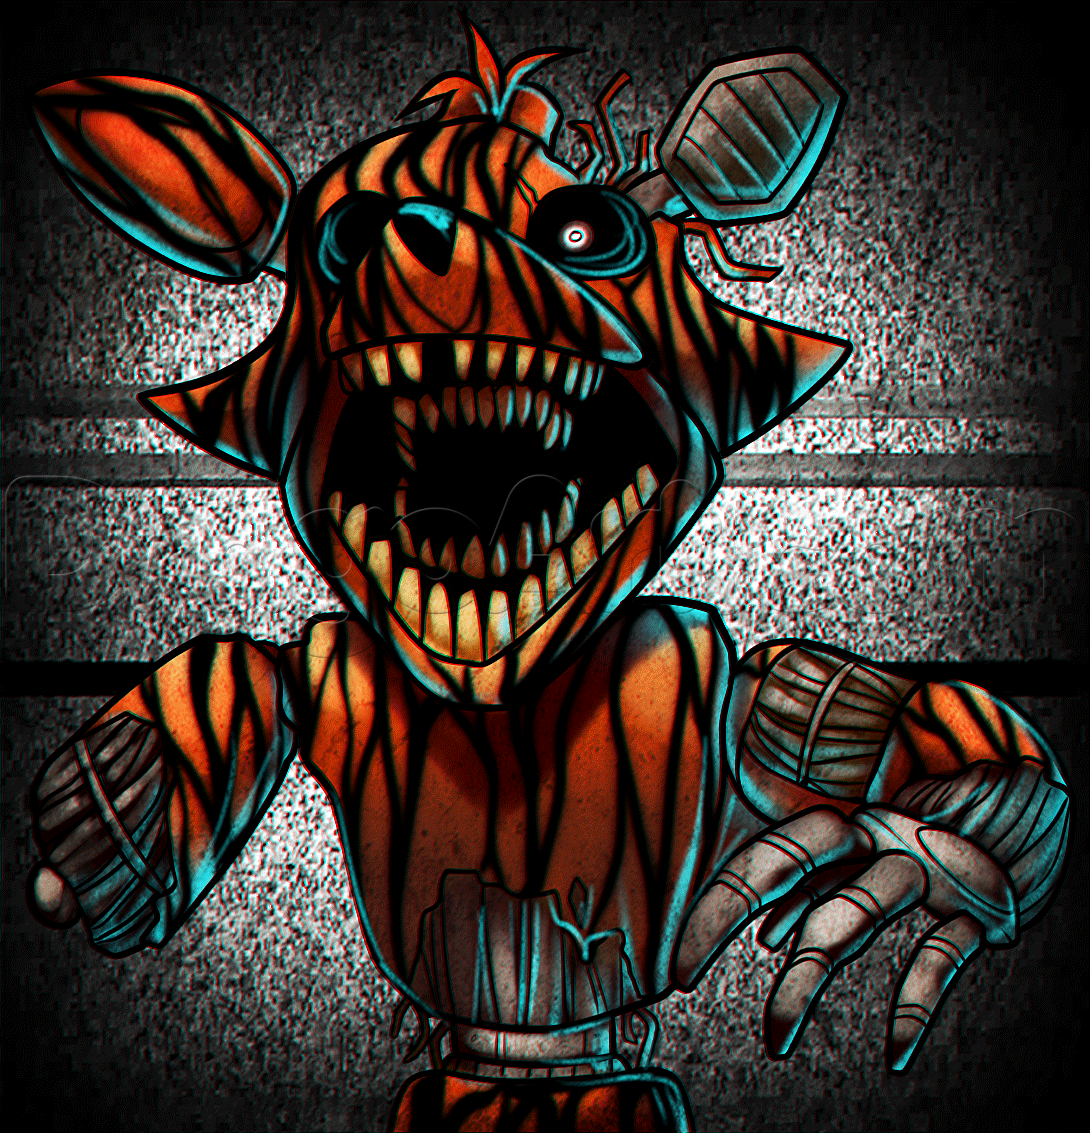 Phantom Foxy from Five Nights at Freddys Step by Step, Video Game Characters, Pop Culture, FREE Onli. Five nights at freddy's, Anime fnaf, Fnaf art